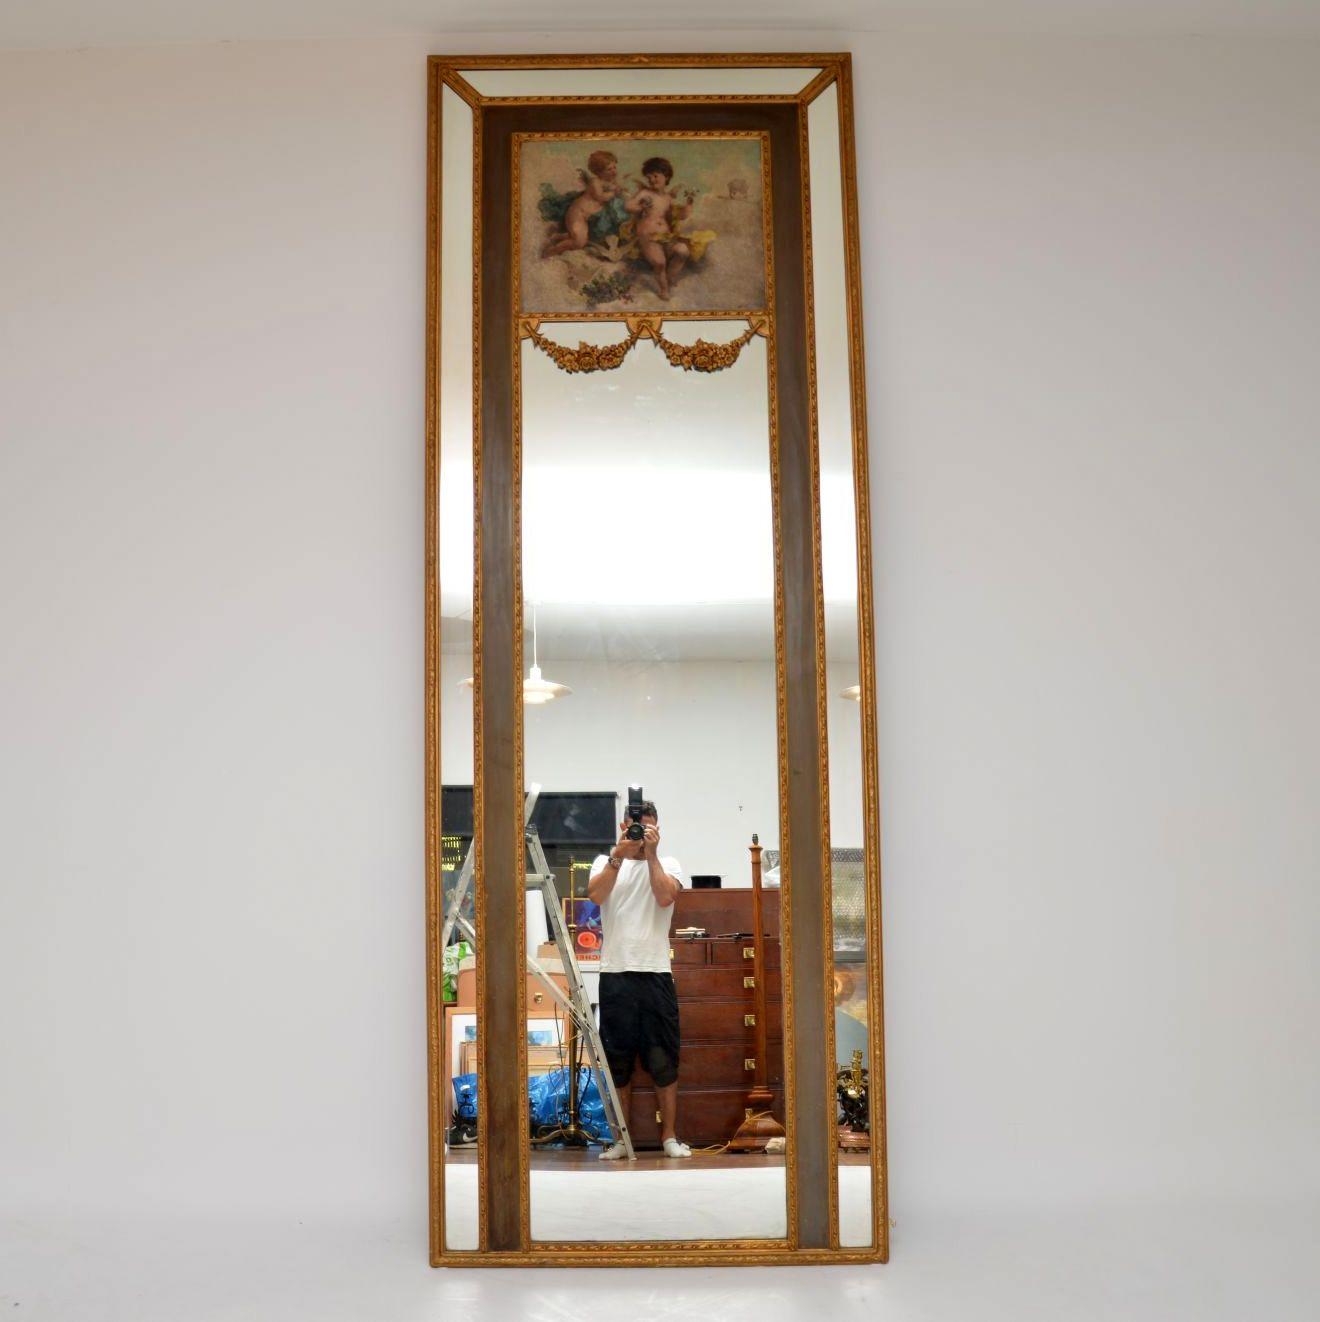 Tall antique decorative gilt wood mirror with a signed oil painting on the top section some other wonderful features.

It’s very hard to show a good image of this mirror & to convey the large proportions. It looks far better in real life, so please